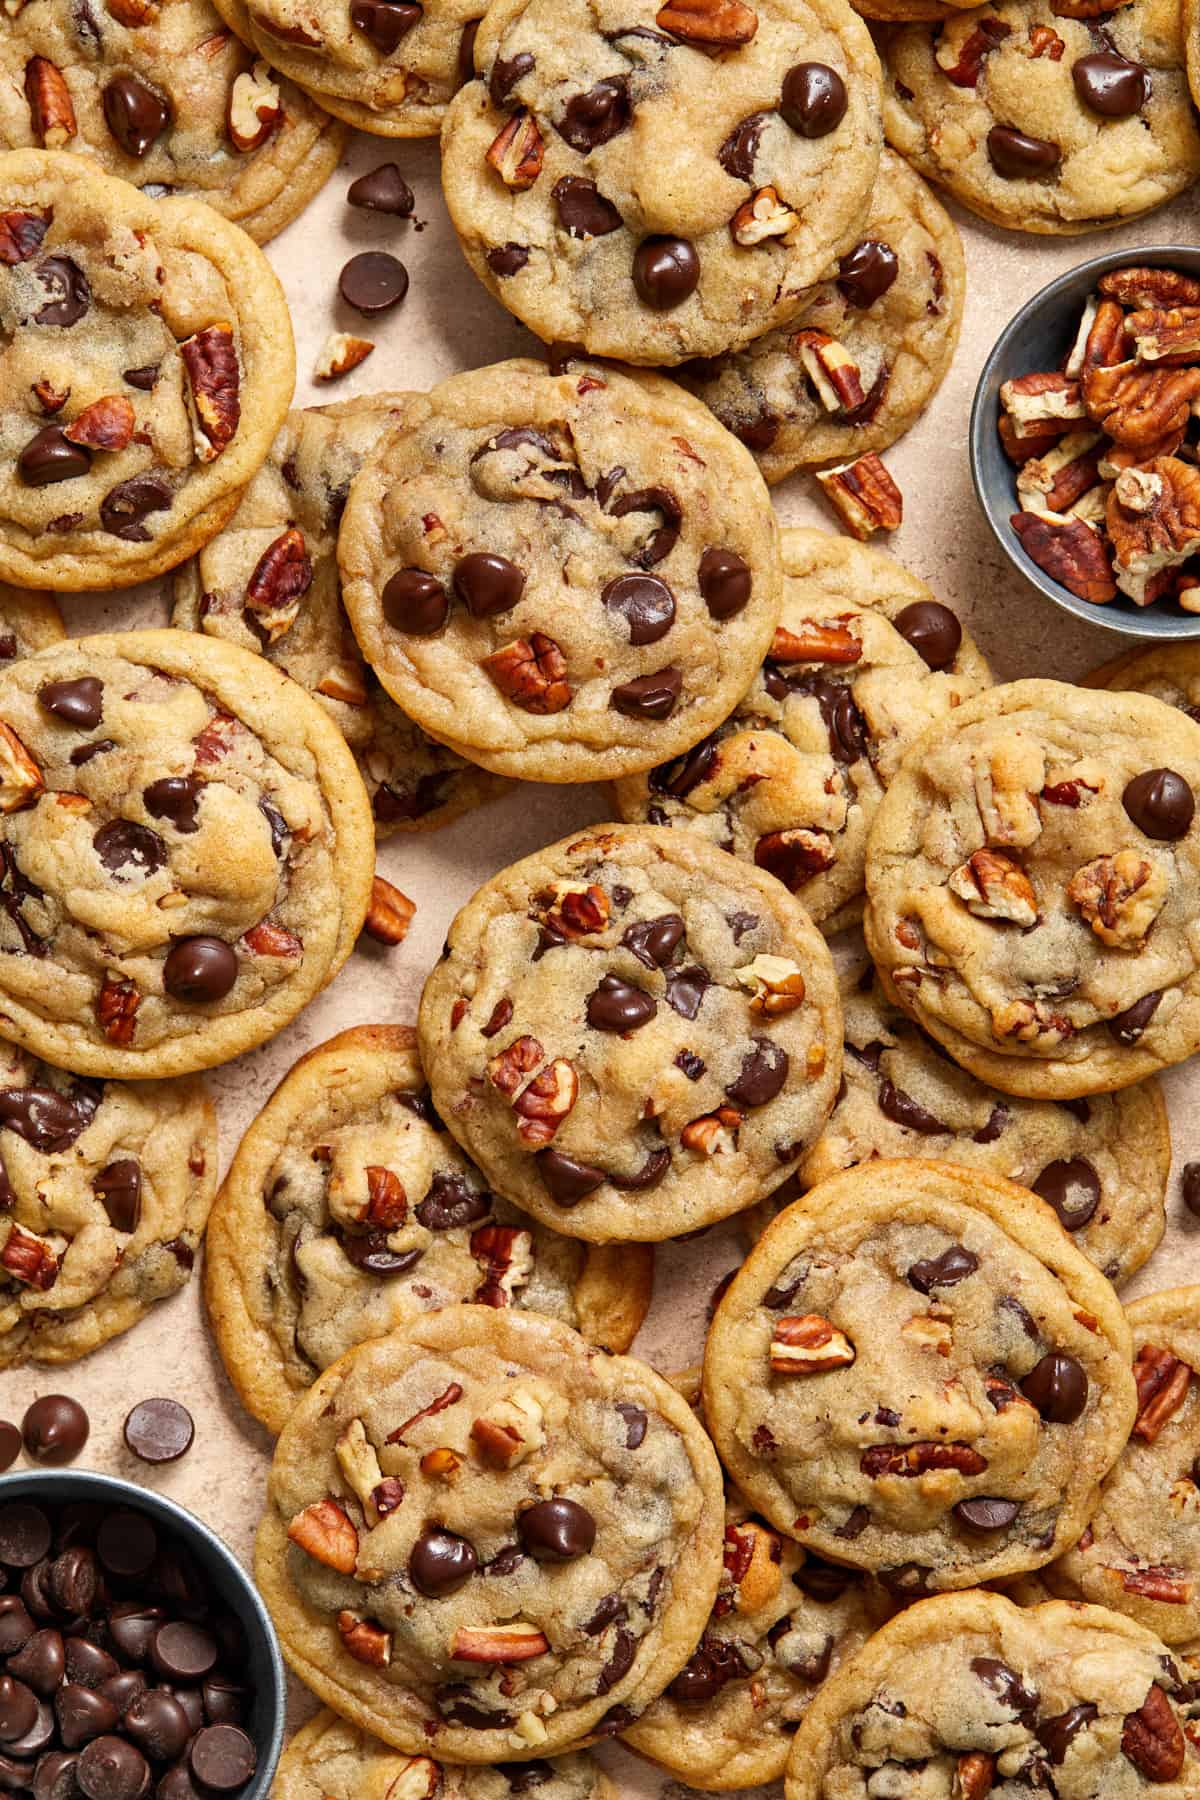 Chocolate chip cookies with pecans added along with bowl of chocolate chips and pecans beside.